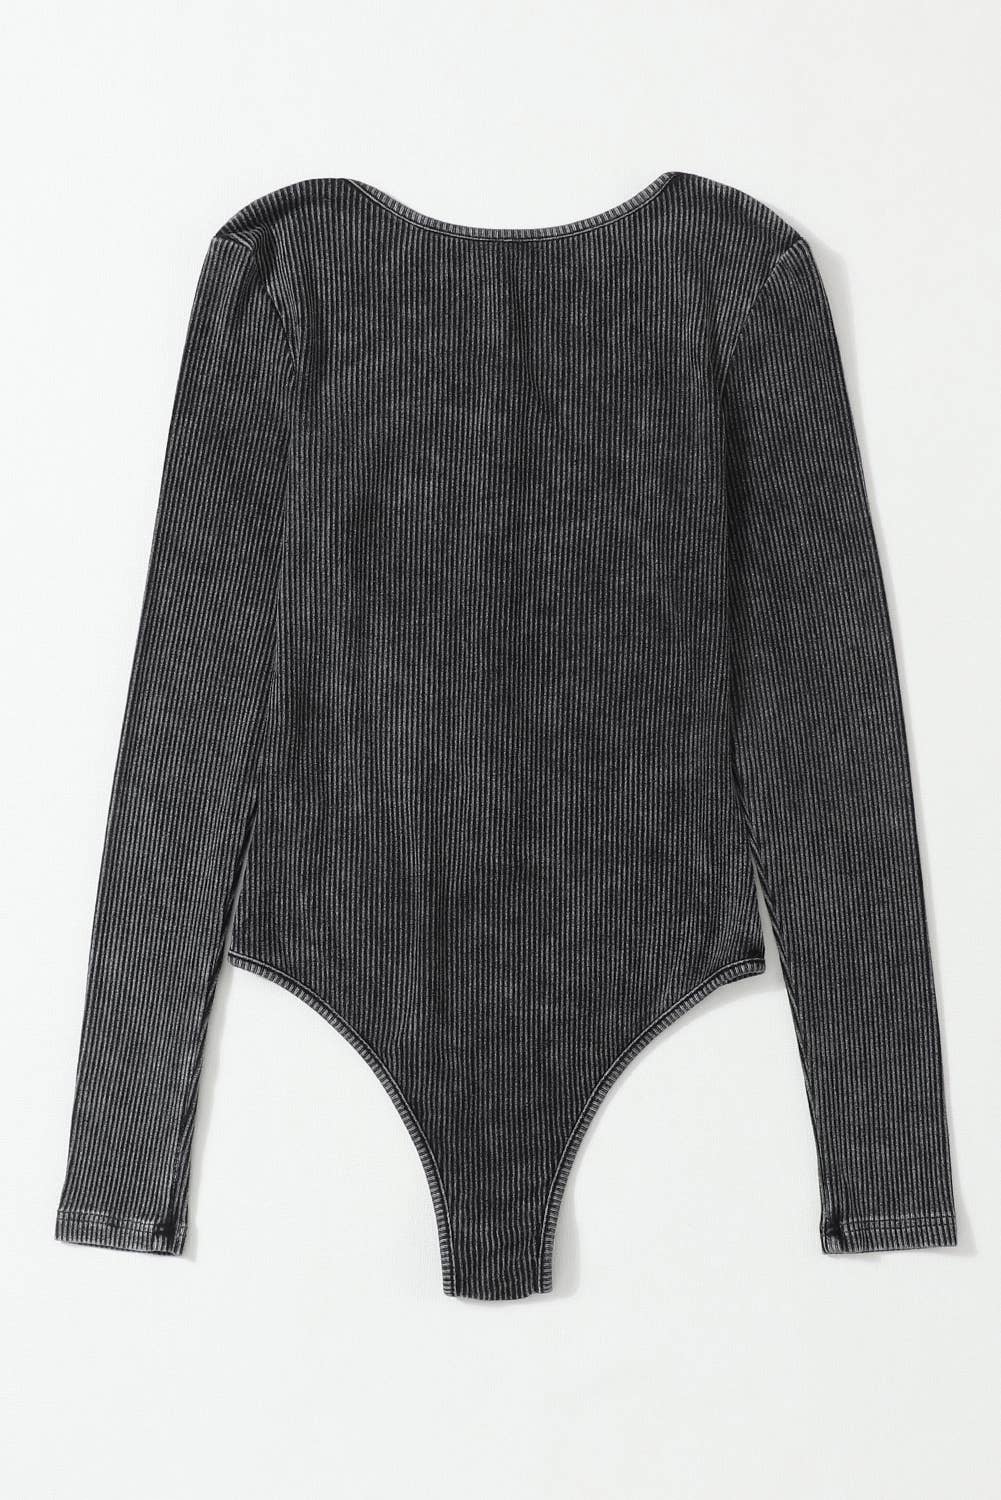 Mineral Wash Ribbed Snap Button Bodysuit